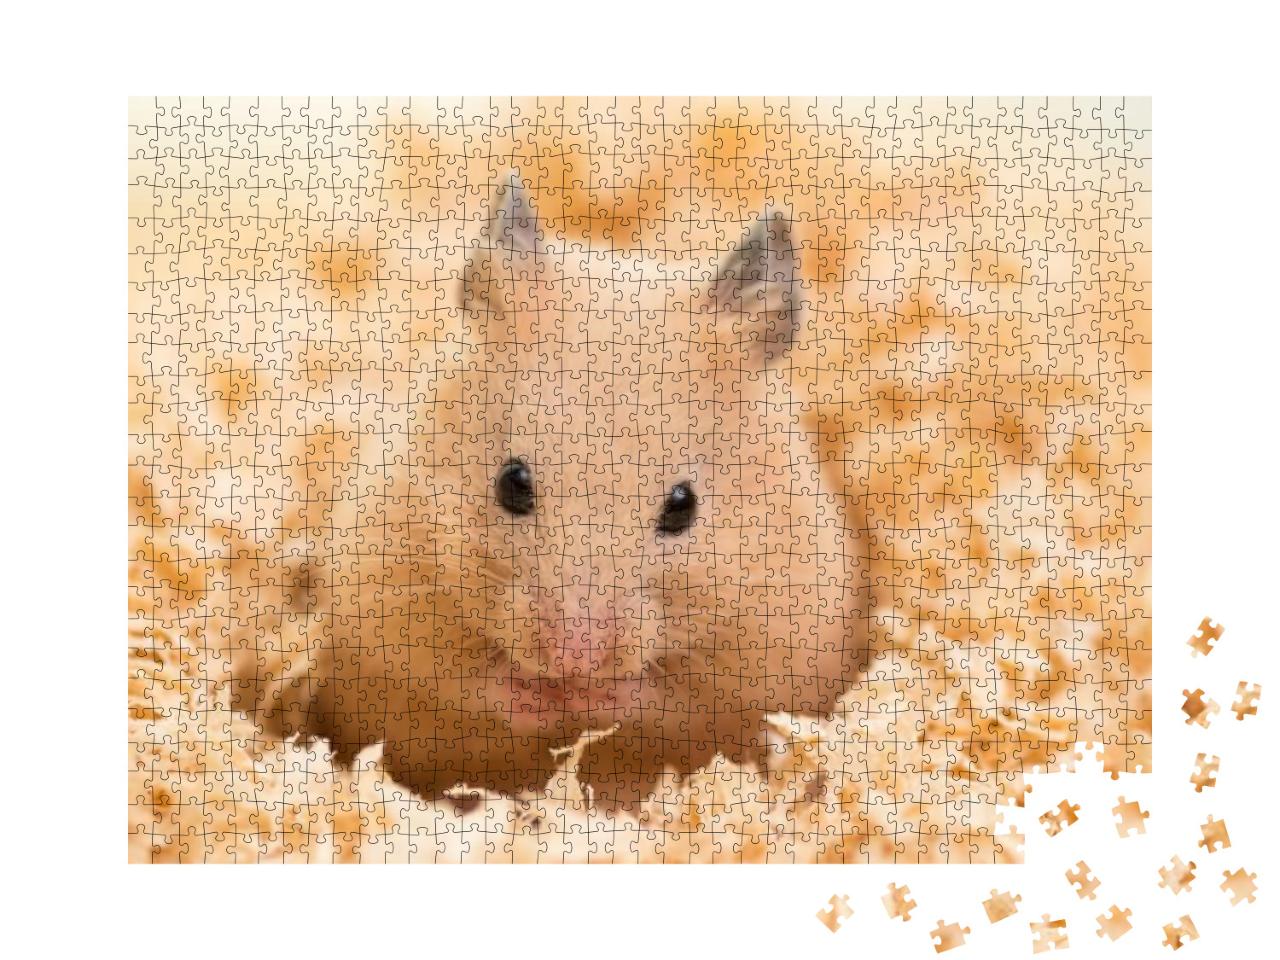 Golden Hamster on Wooden Chips... Jigsaw Puzzle with 1000 pieces